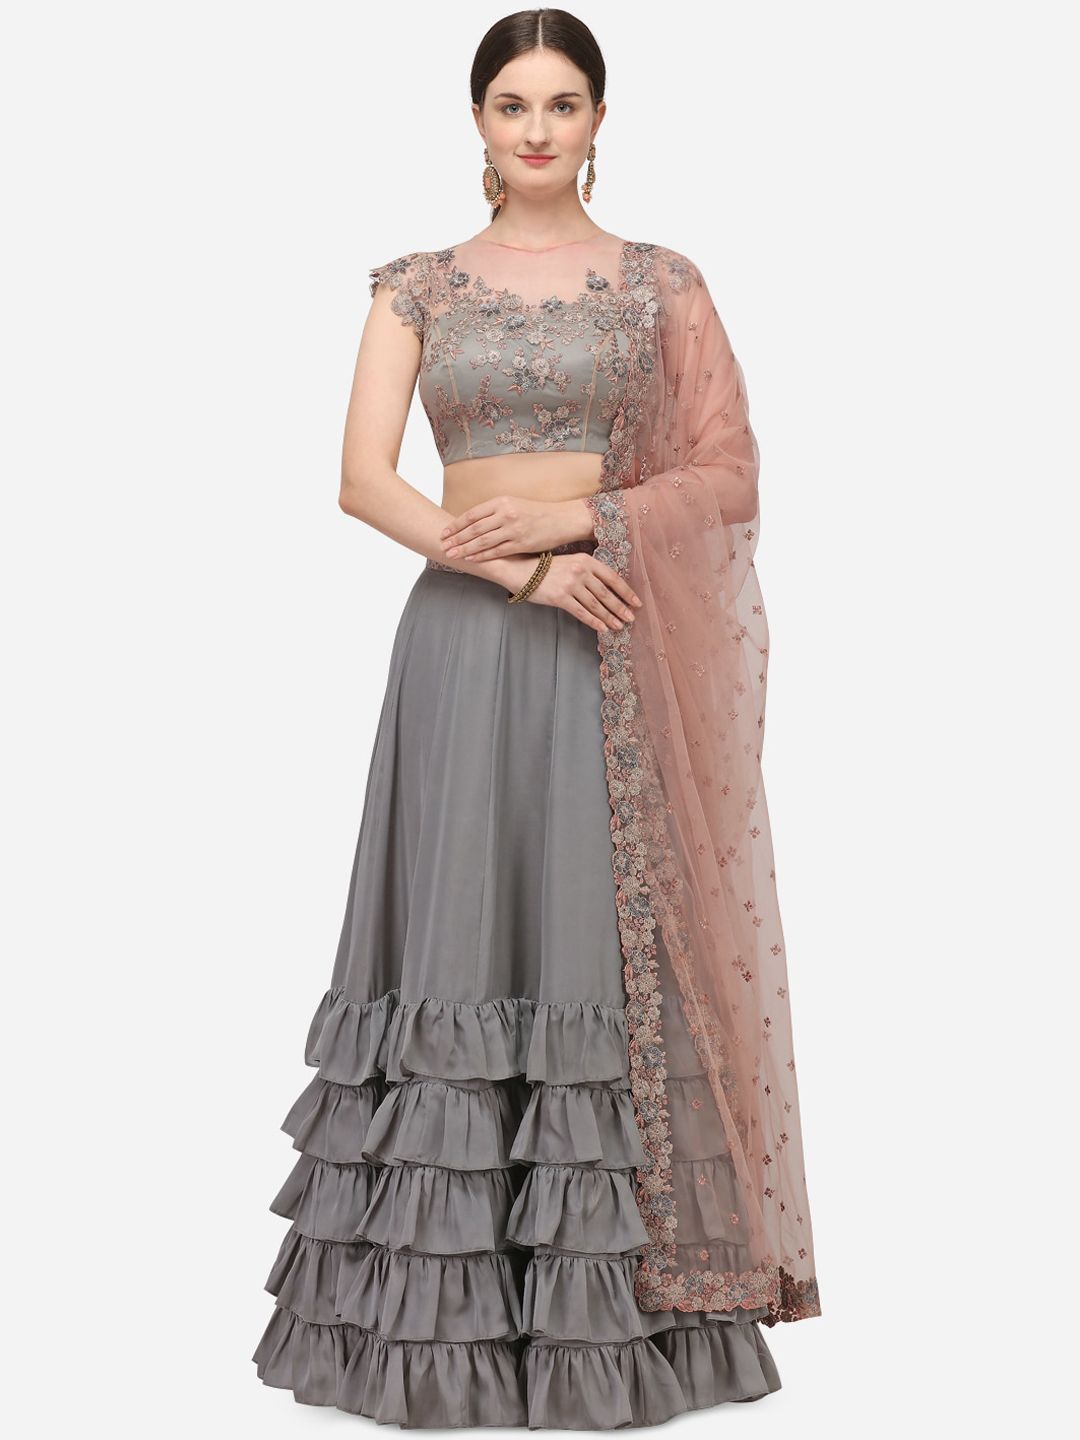 NAKKASHI Grey & Peach-Coloured Embroidered Ready to Wear Lehenga & Unstitched Blouse with Dupatta Price in India